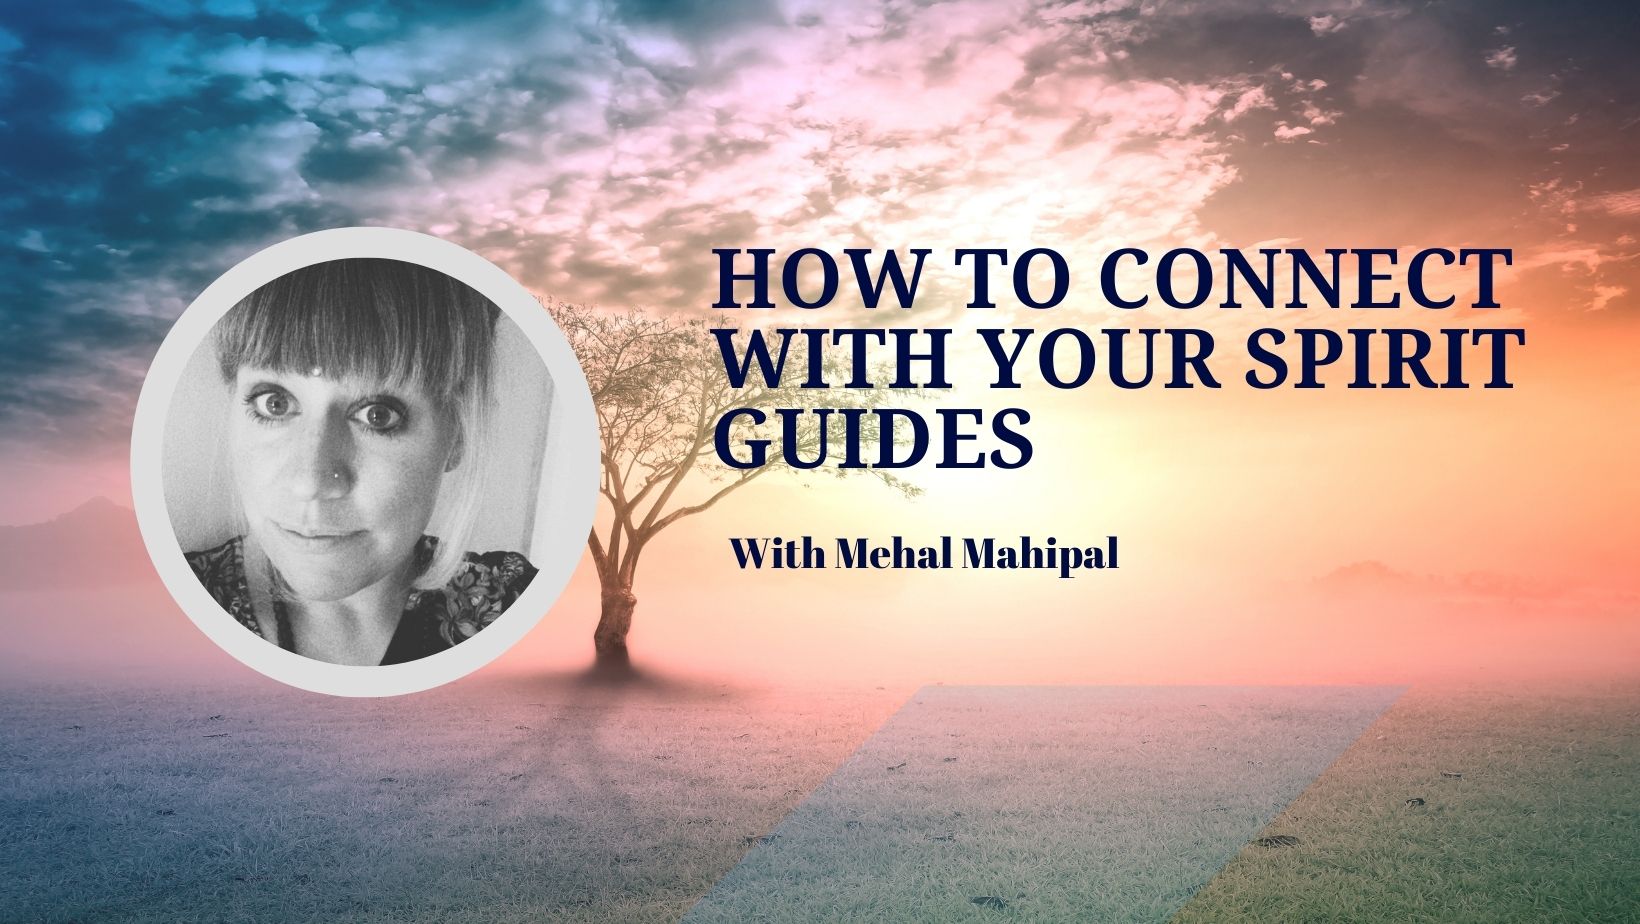 Connect with spirit guides